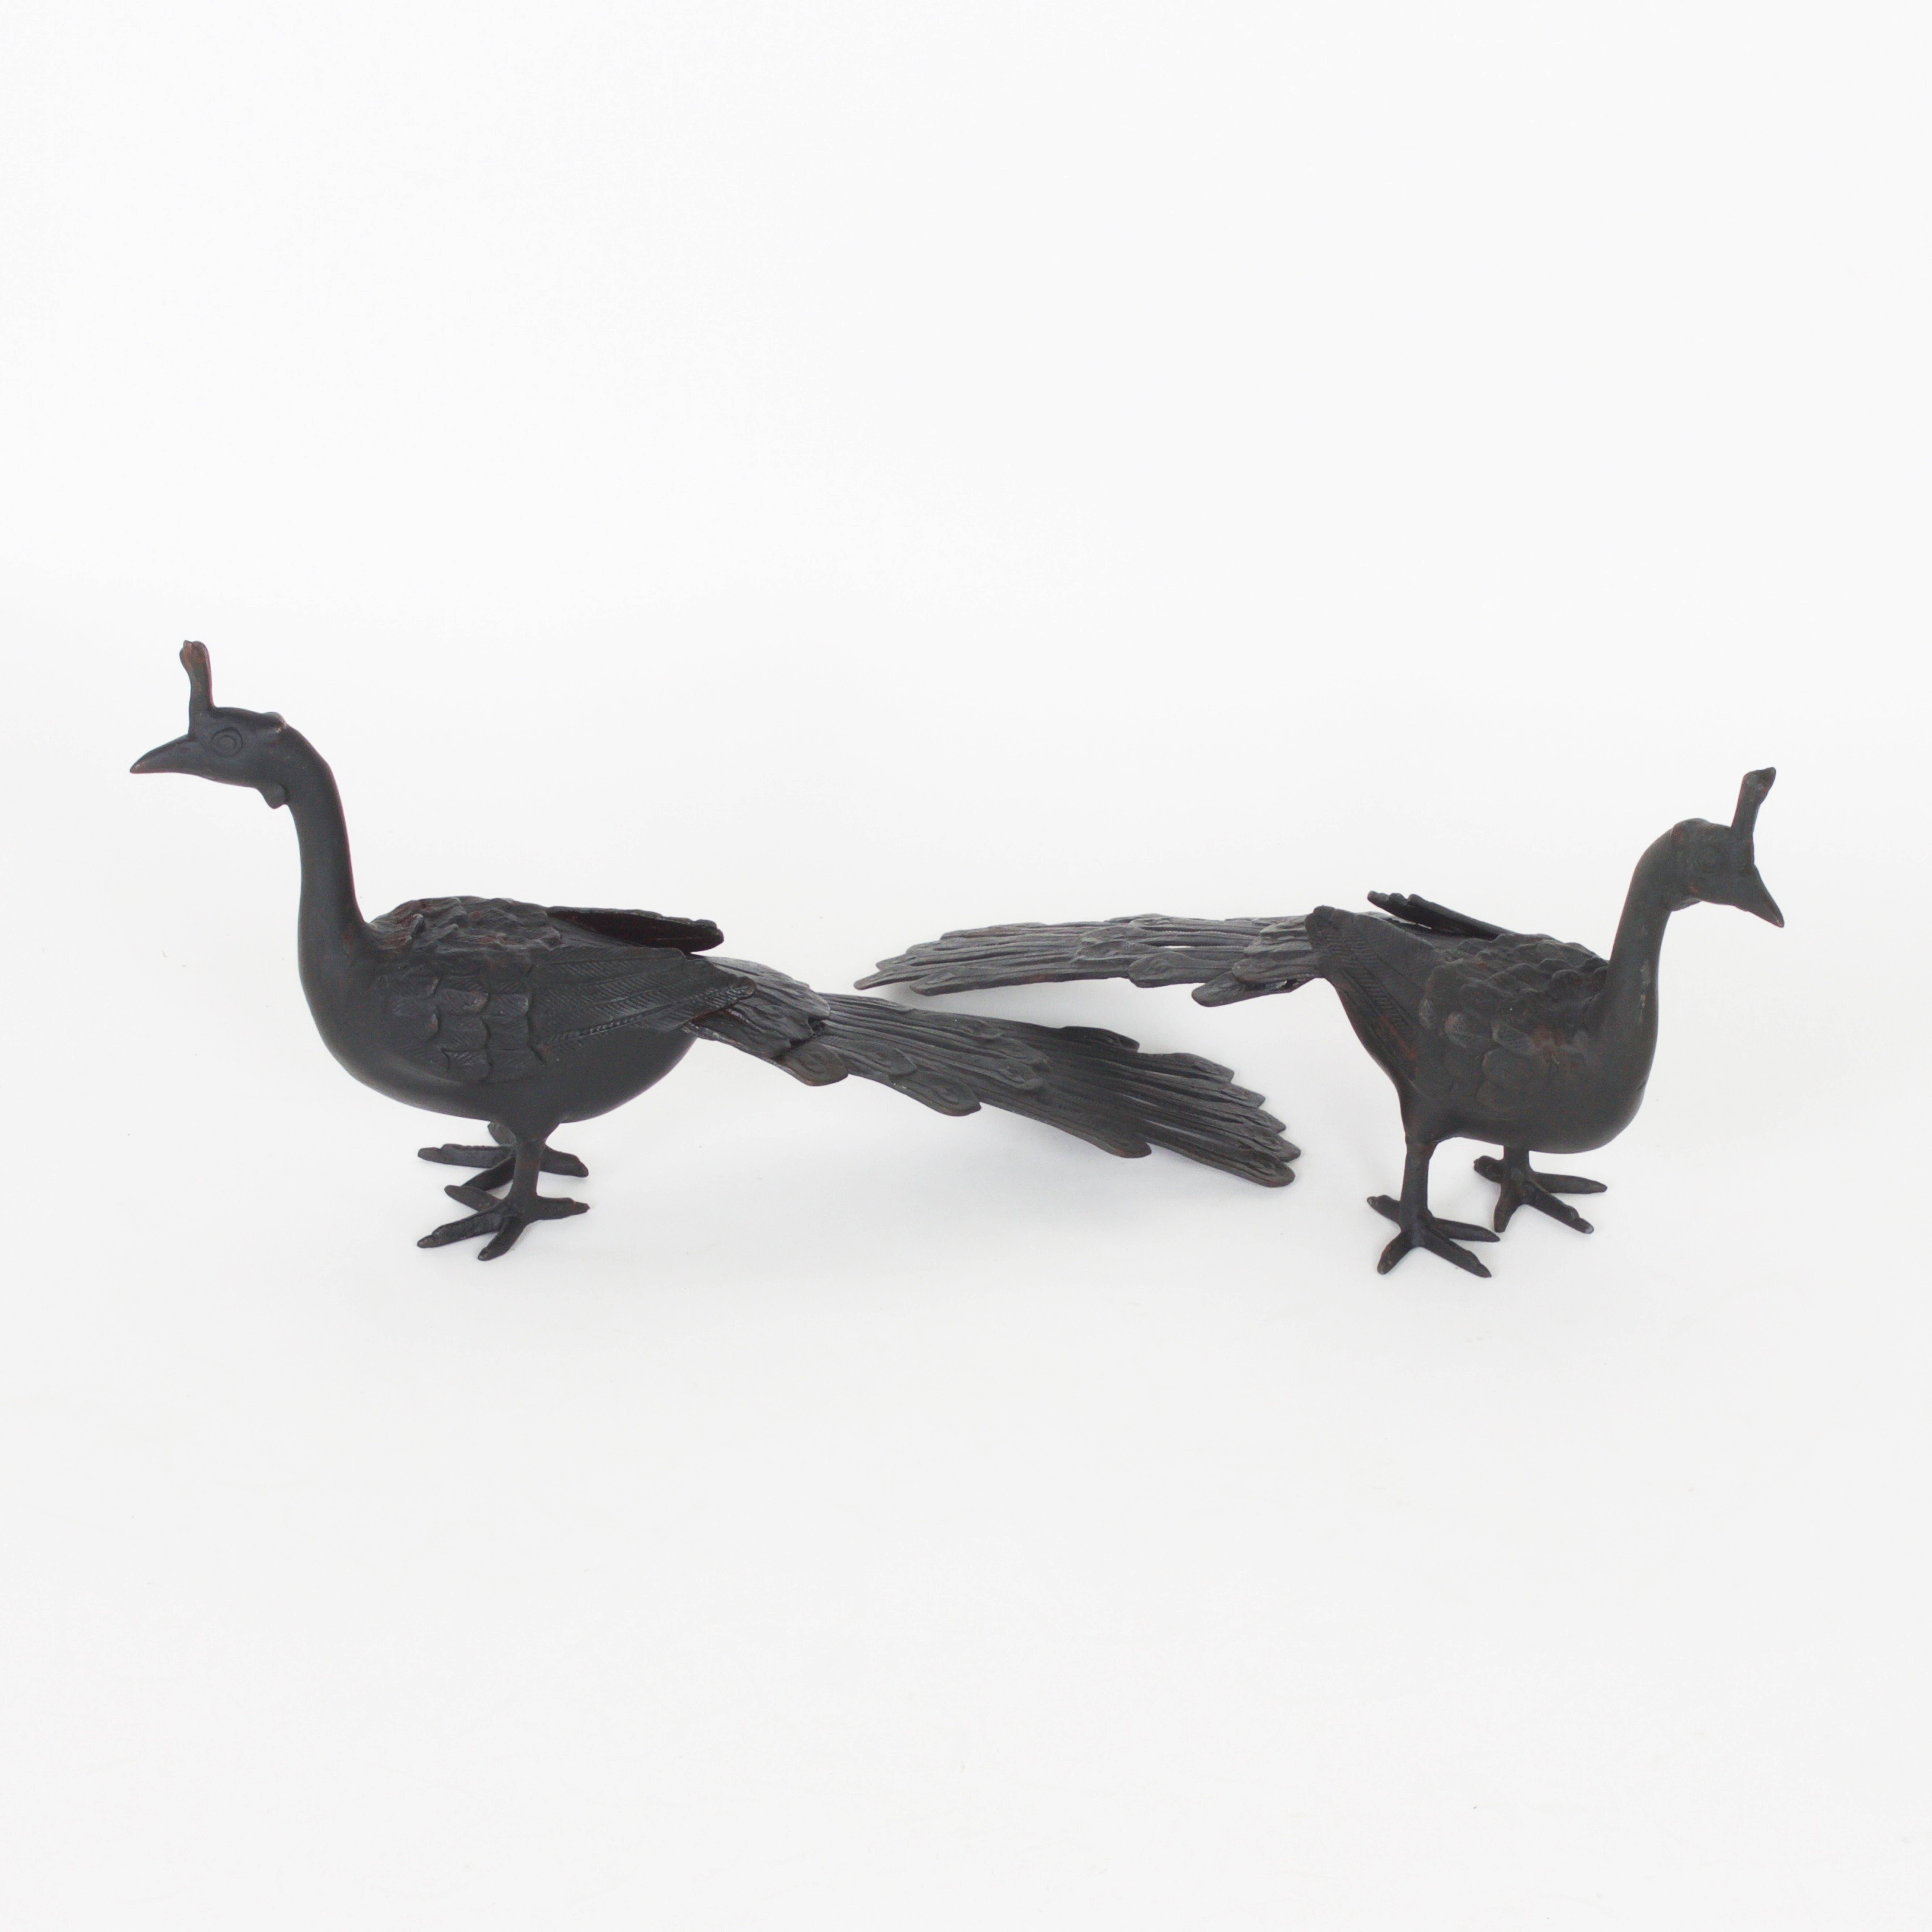 Interesting pair of cast iron birds in the form of peacocks with an alert stance and quirky expressions. These birds have rustic time worn black finish over a detailed casting.

 
 